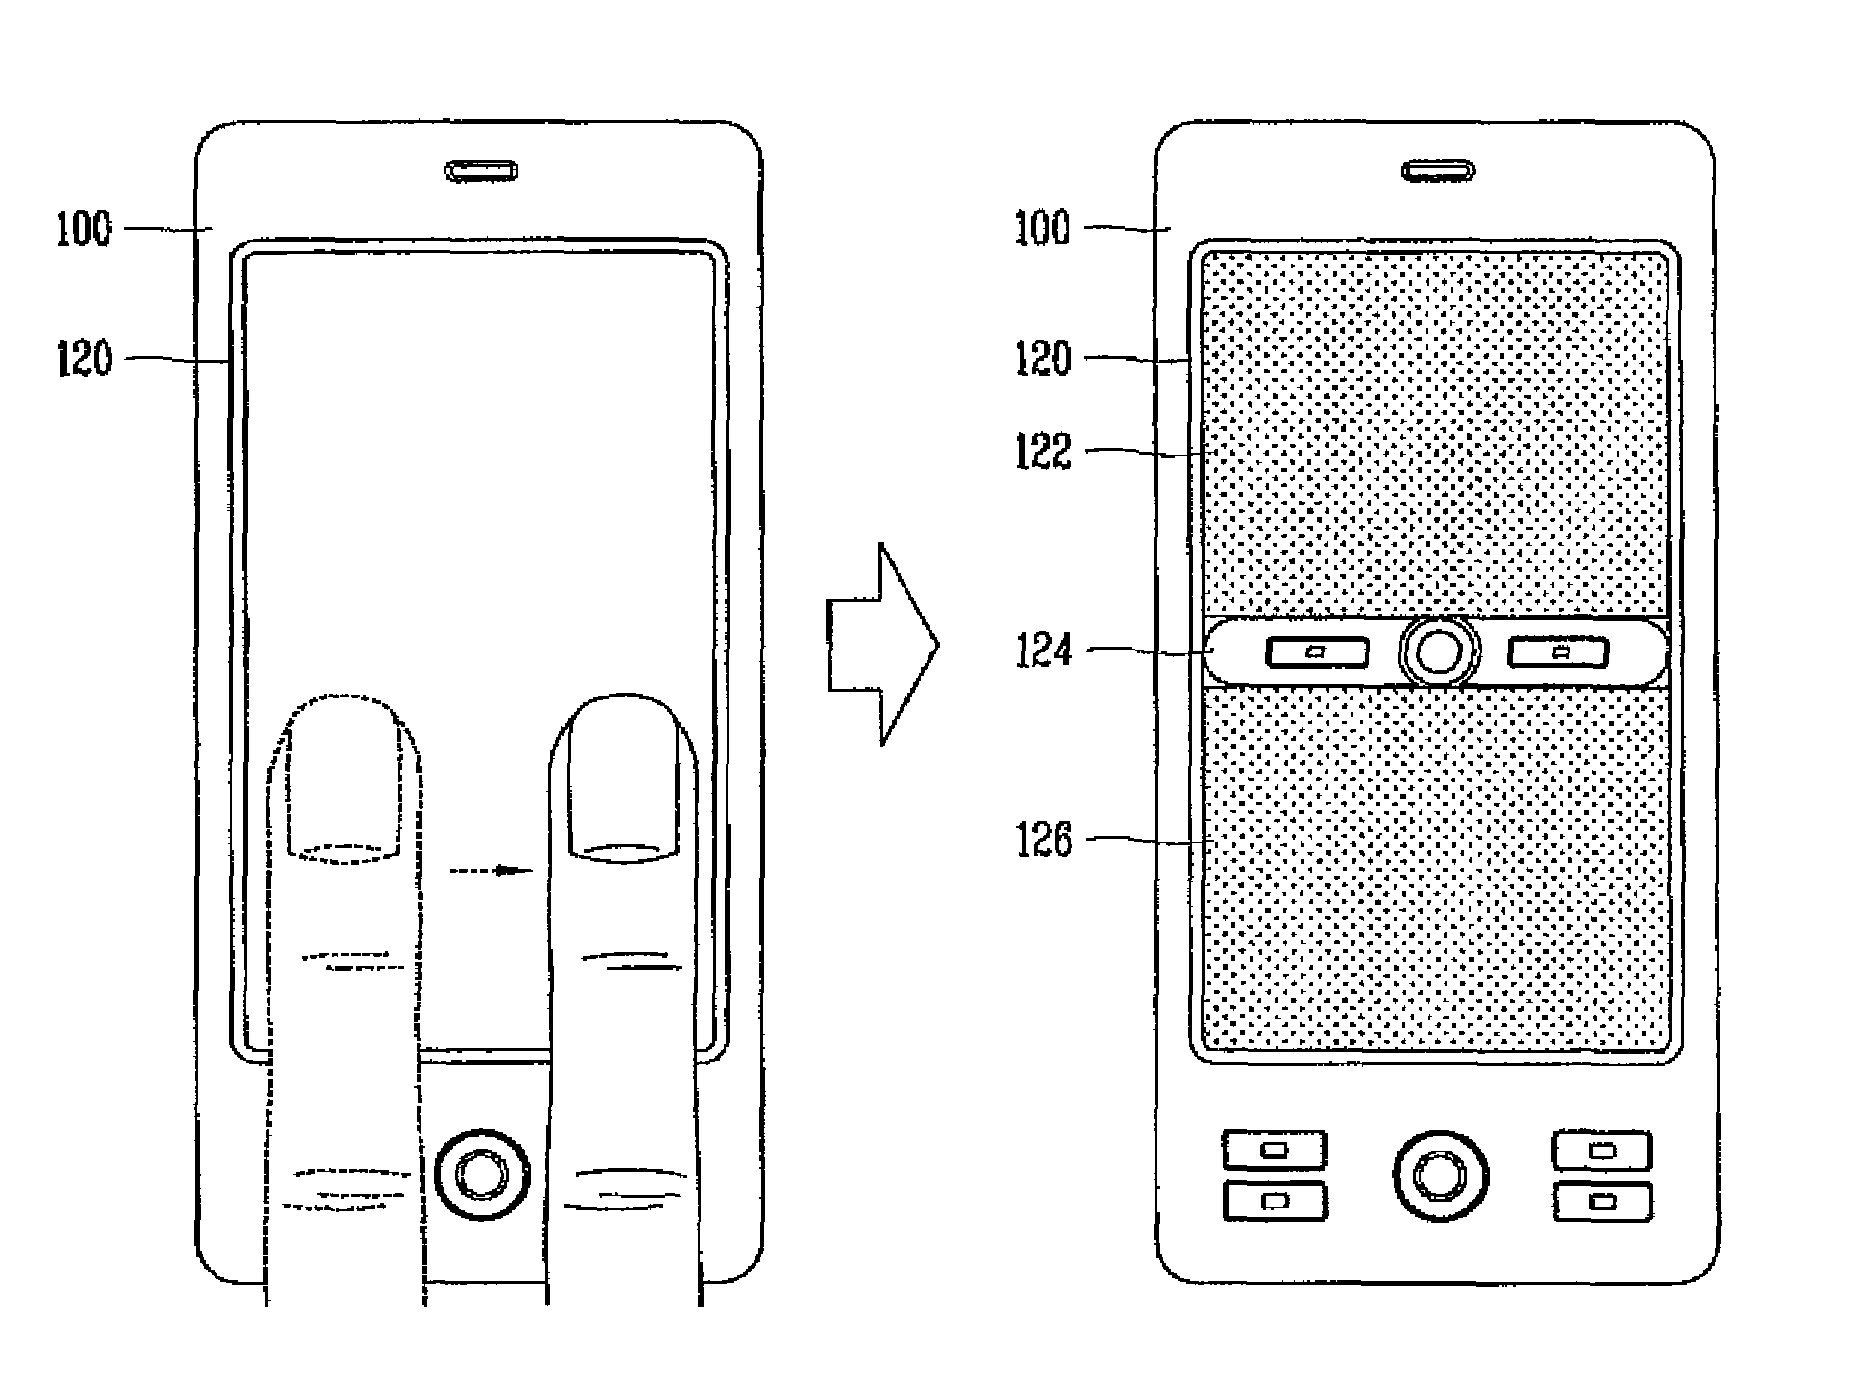 Display device and method of mobile terminal